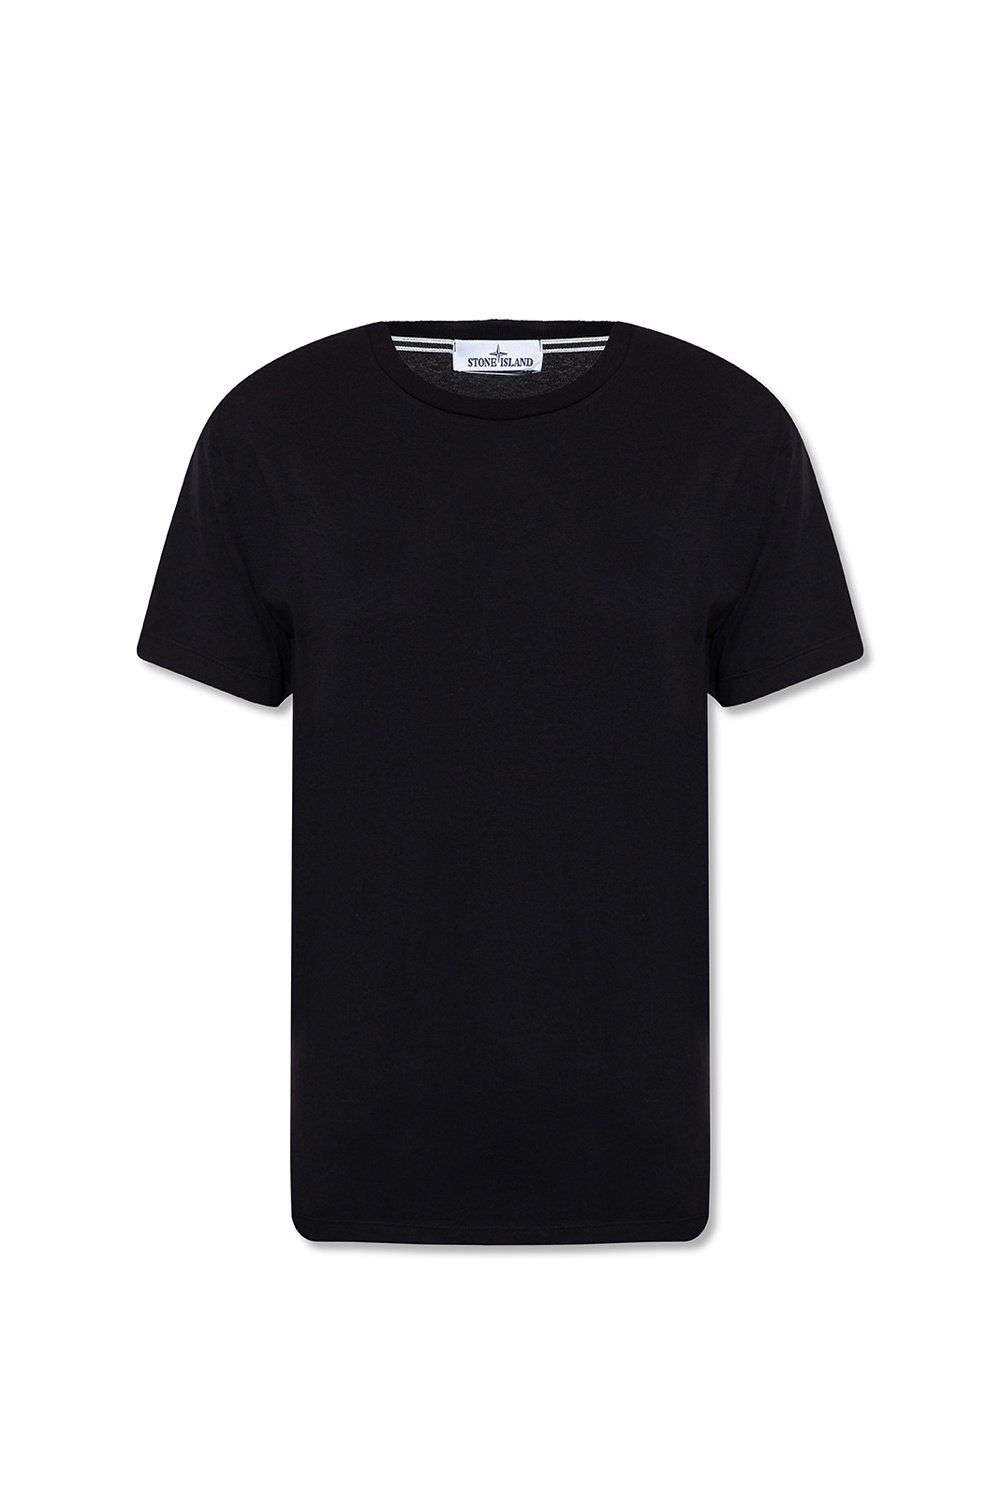 Stone Island Native Youth logo front t-shirt in black